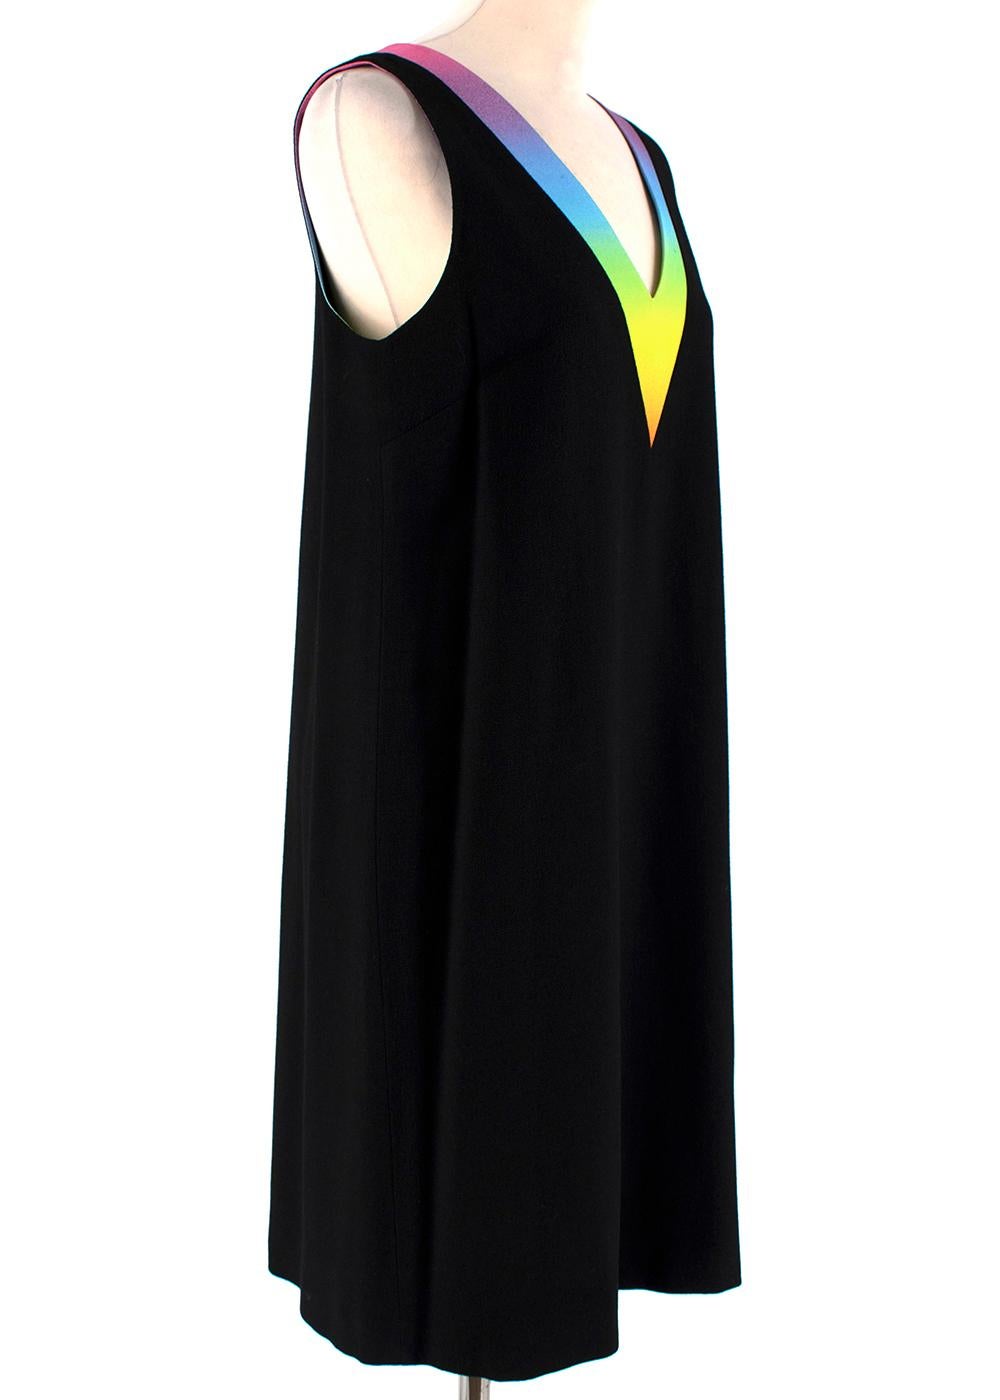 Christopher Kane Rainbow Collar Black Wool Dress

-Made of a soft wool textured crepe 
-Beautiful rainbow gradient panel inserto to the collar 
-V shaped neckline 
-Luxurious silk lining 
-Zip fastening to the back 
-Timeless classic cut with a